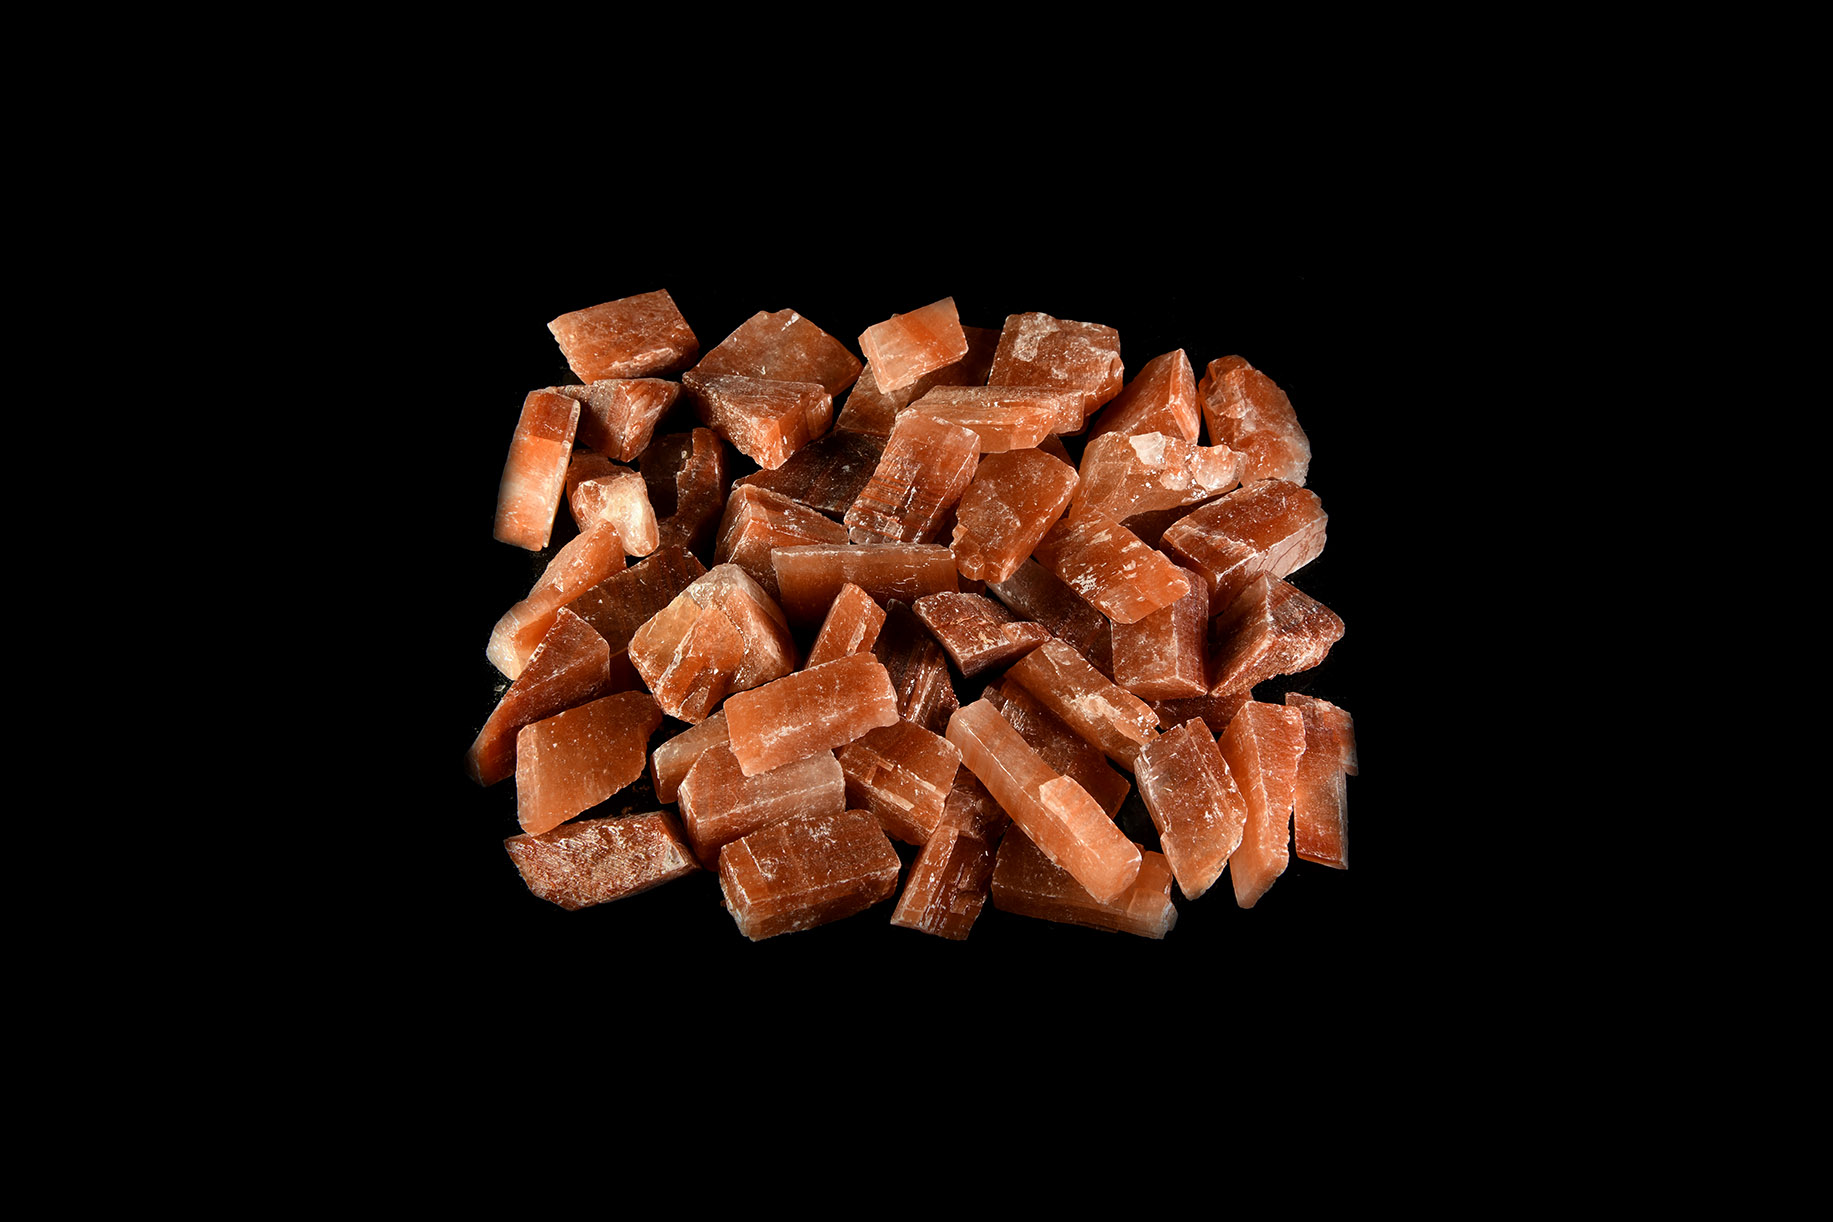 Natural History - 50 Mexico Red Calcite Mineral Specimens